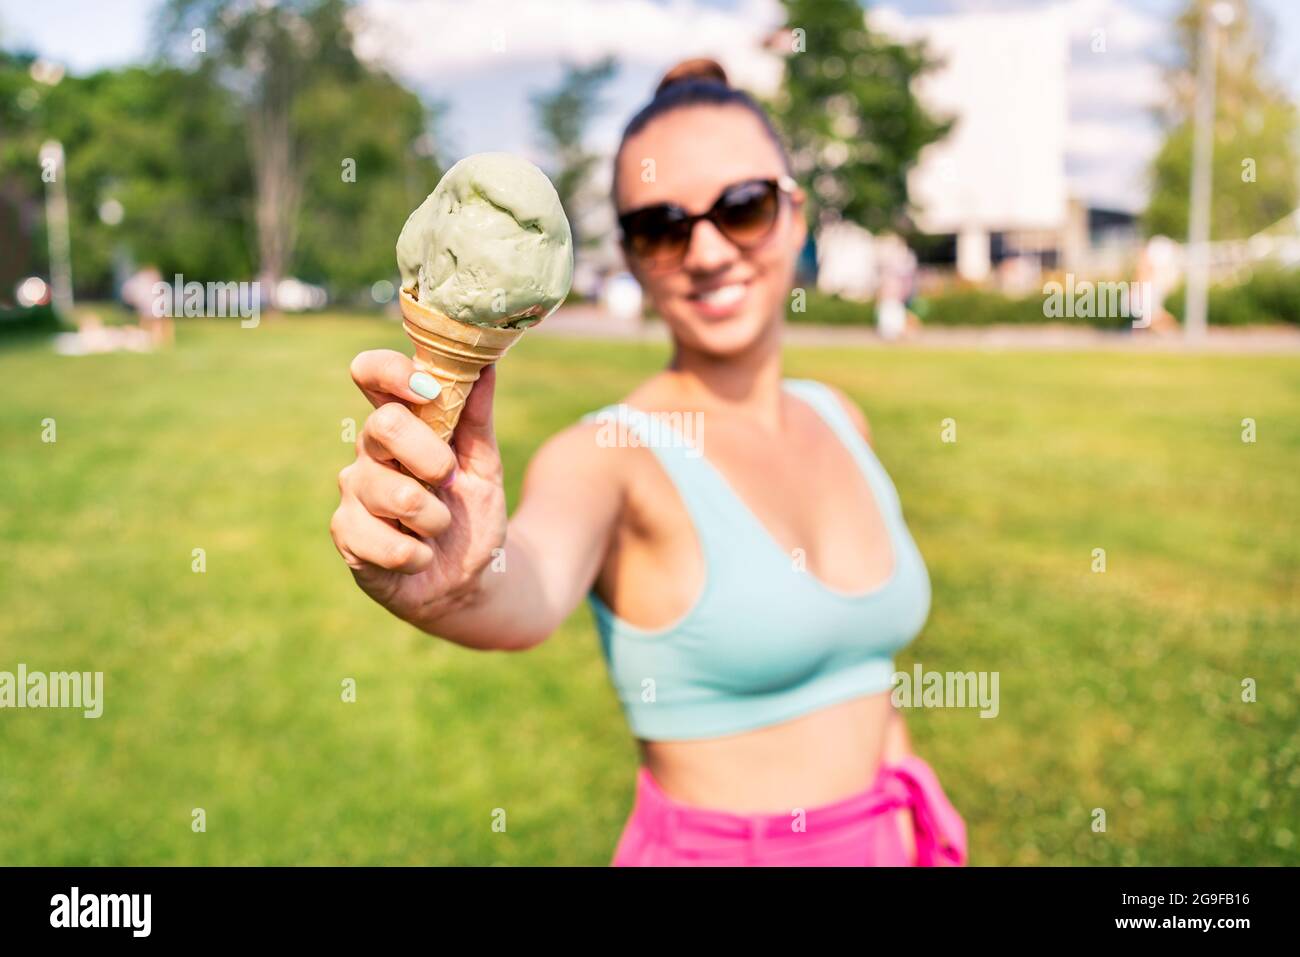 Fit slim woman showing ice cream cone in city park in summer. Happy smiling portrait of young laughing model and melting icecream. Stock Photo